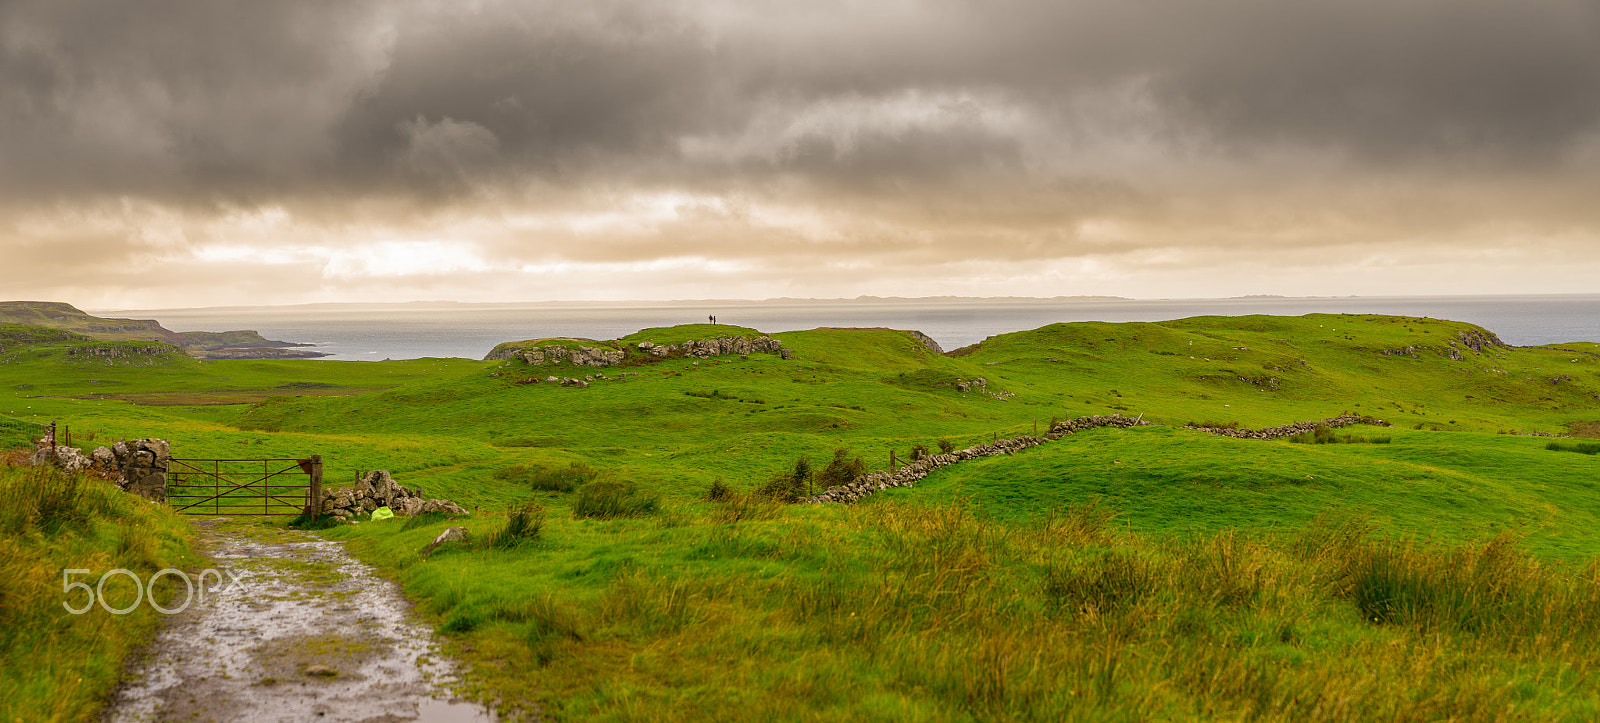 Sony a7 sample photo. Isle of mull landscape photography